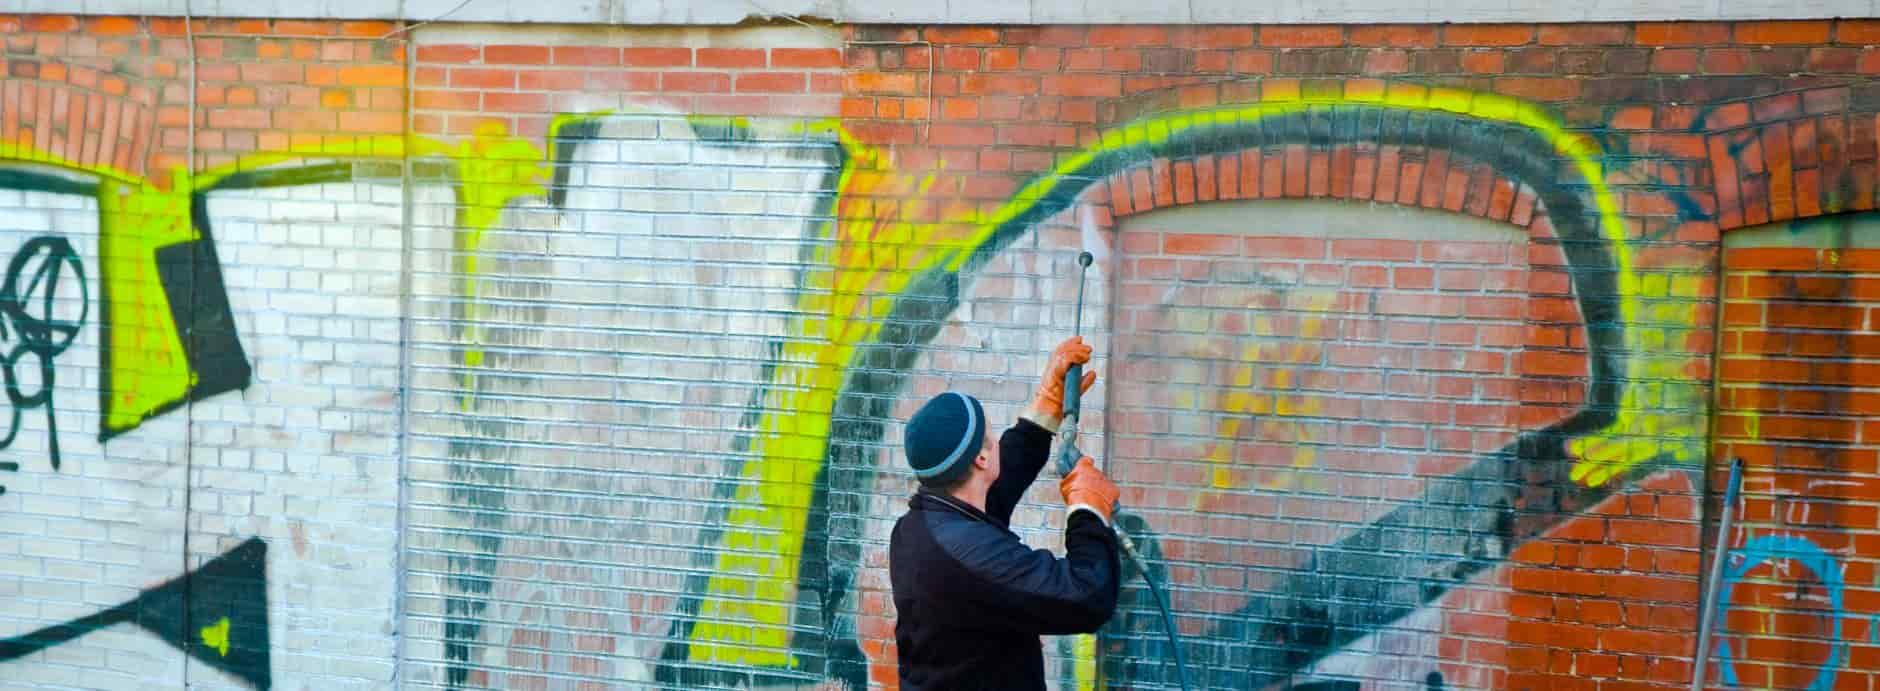 Graffiti Removal in Newcastle upon Tyne